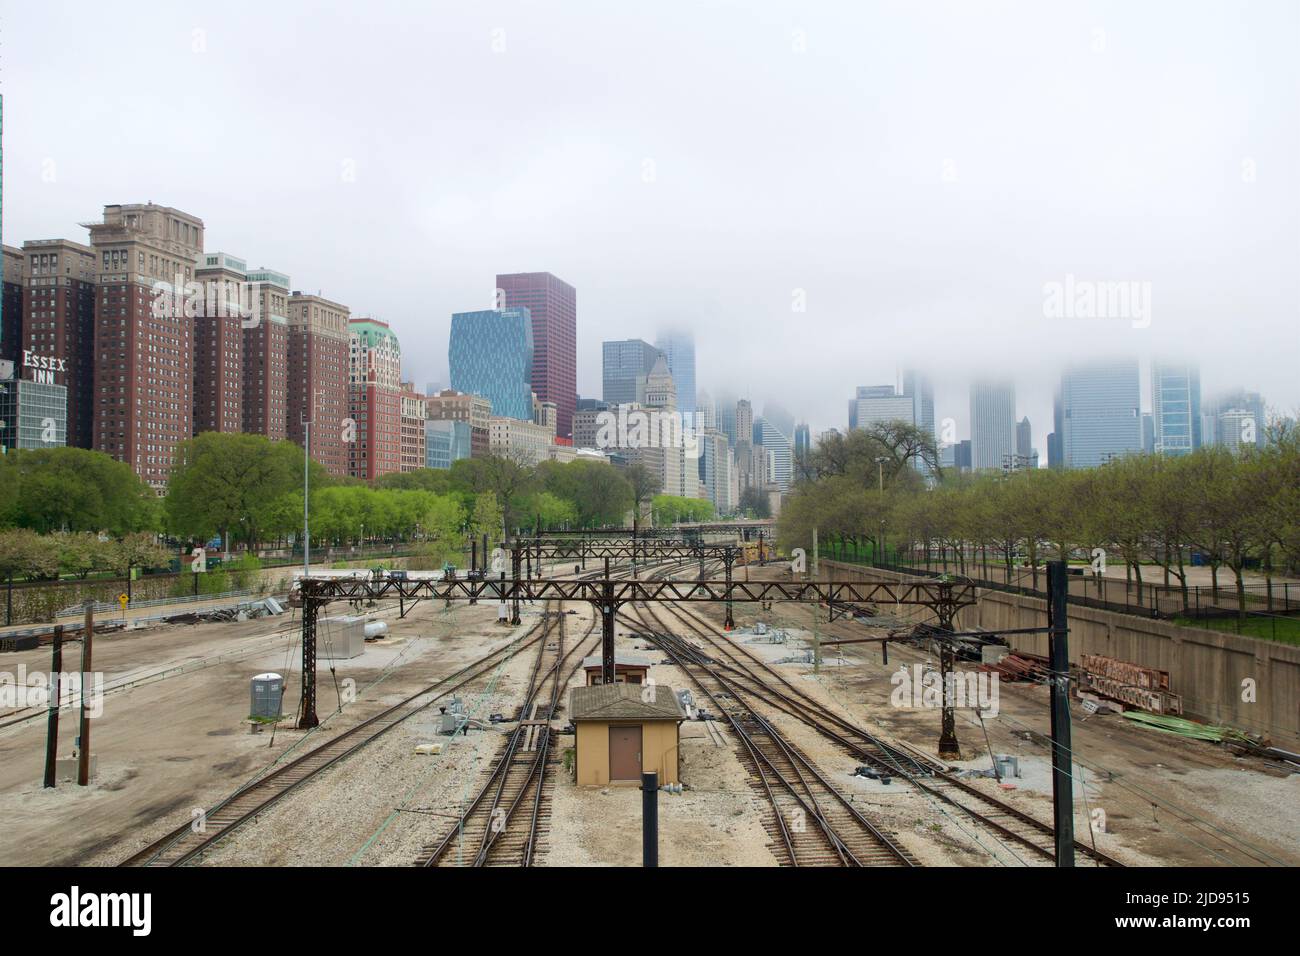 CHICAGO, ILLINOIS, UNITED STATES - MAY 12, 2018: Tracks with switches and trains in downtown Chicago's Grant Park with the skyline in the background Stock Photo